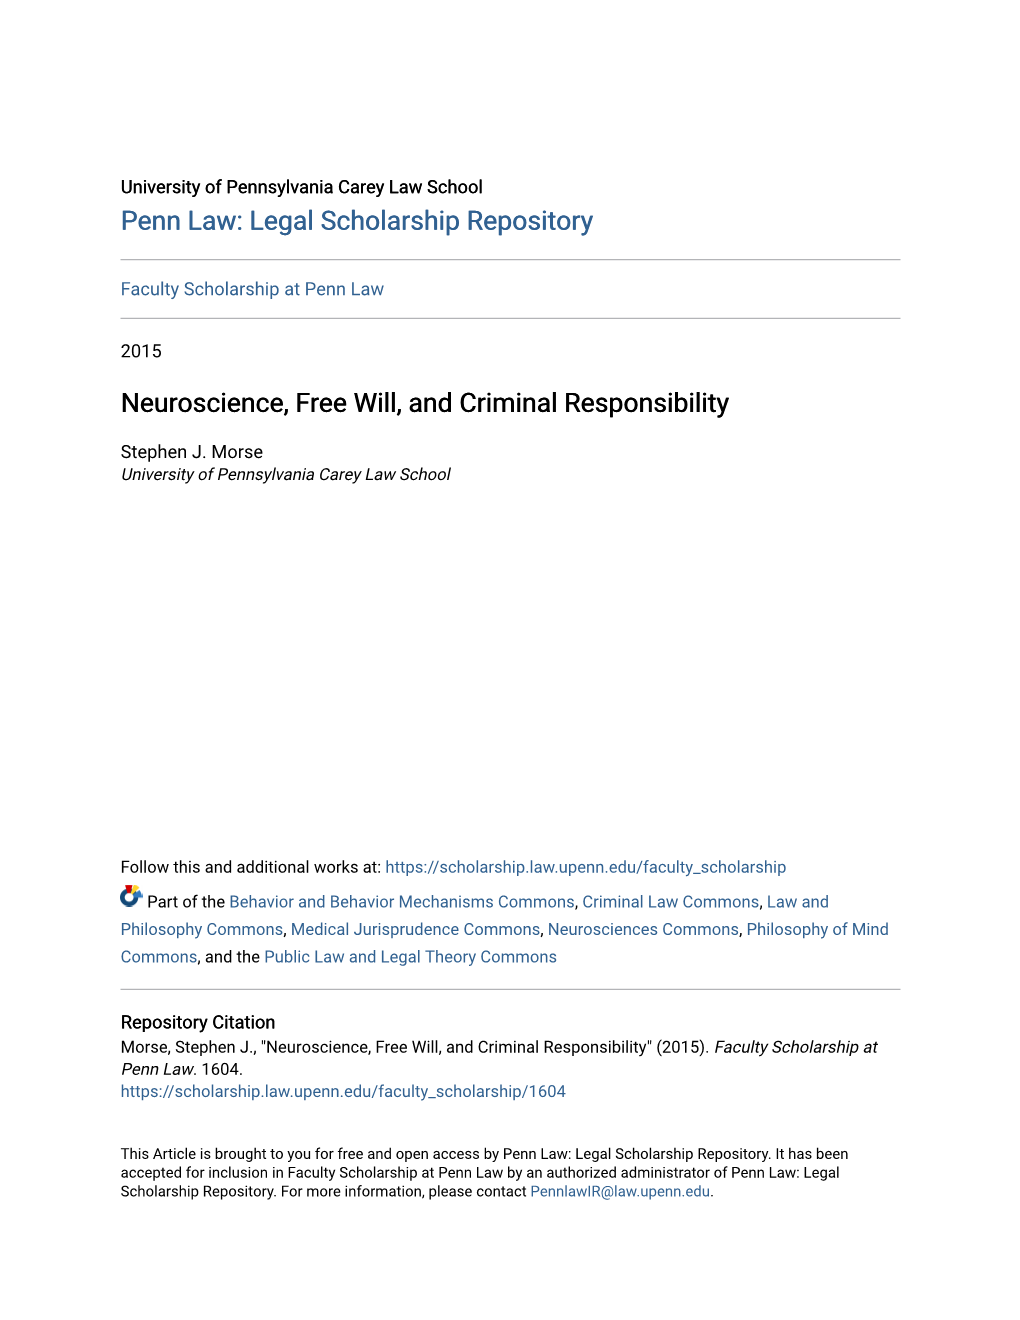 Neuroscience, Free Will, and Criminal Responsibility